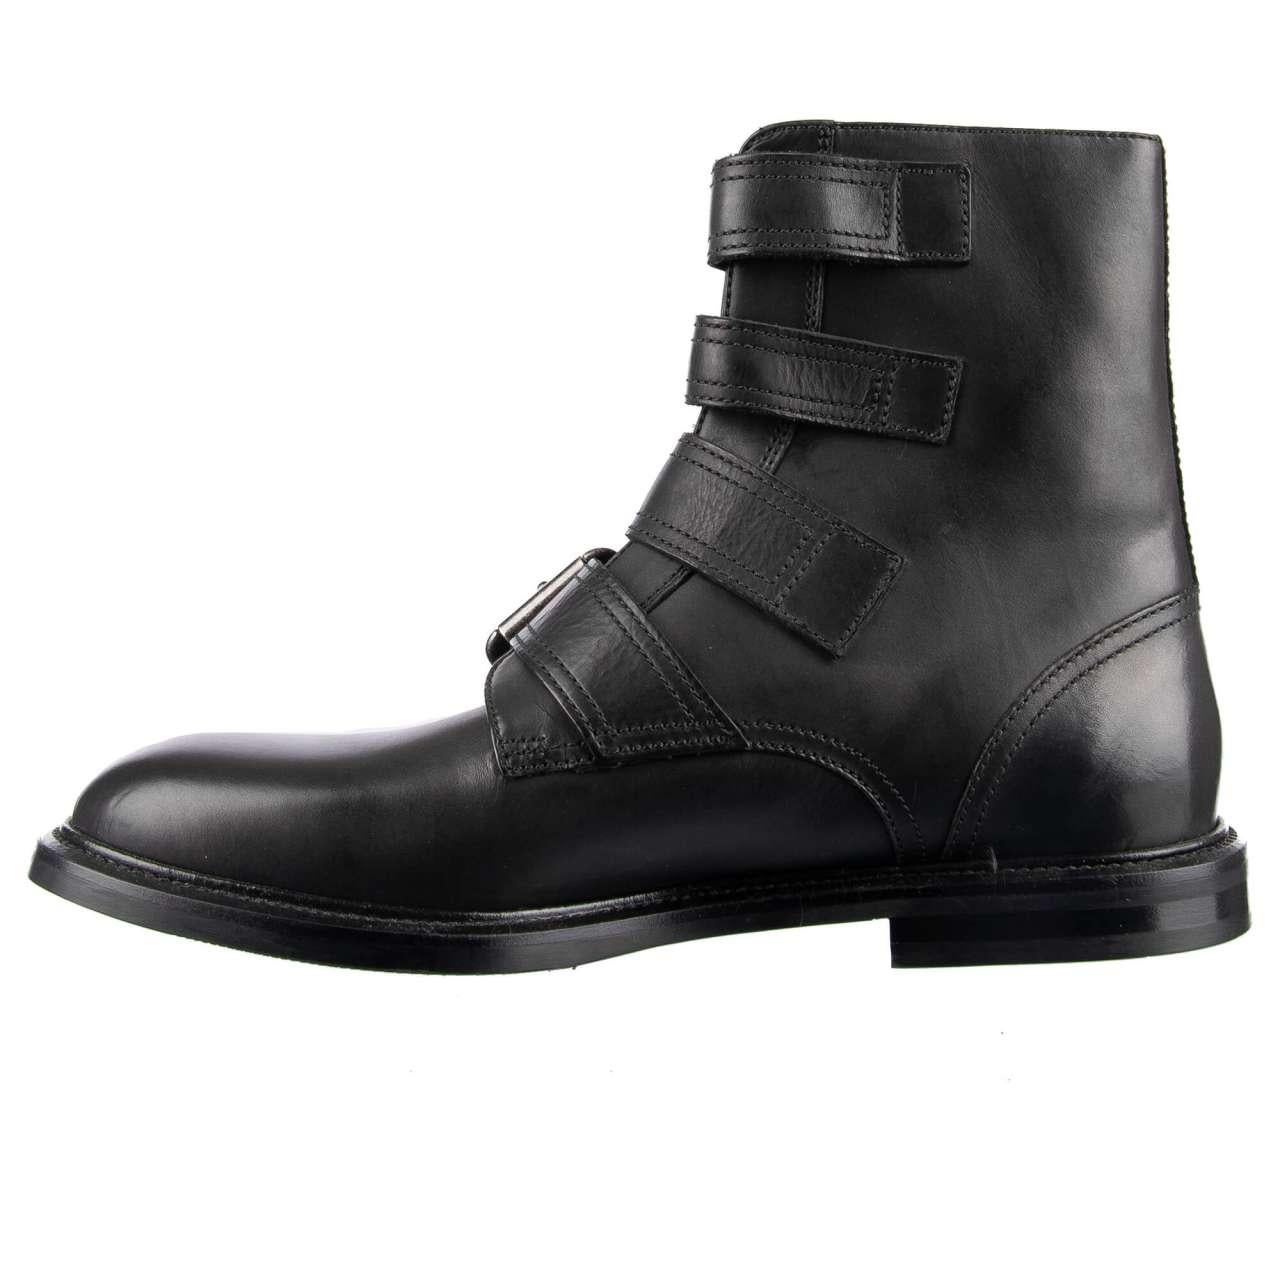 Dolce & Gabbana - Ankle Boots with Buckles MARSALA Black EUR 42 In Excellent Condition For Sale In Erkrath, DE